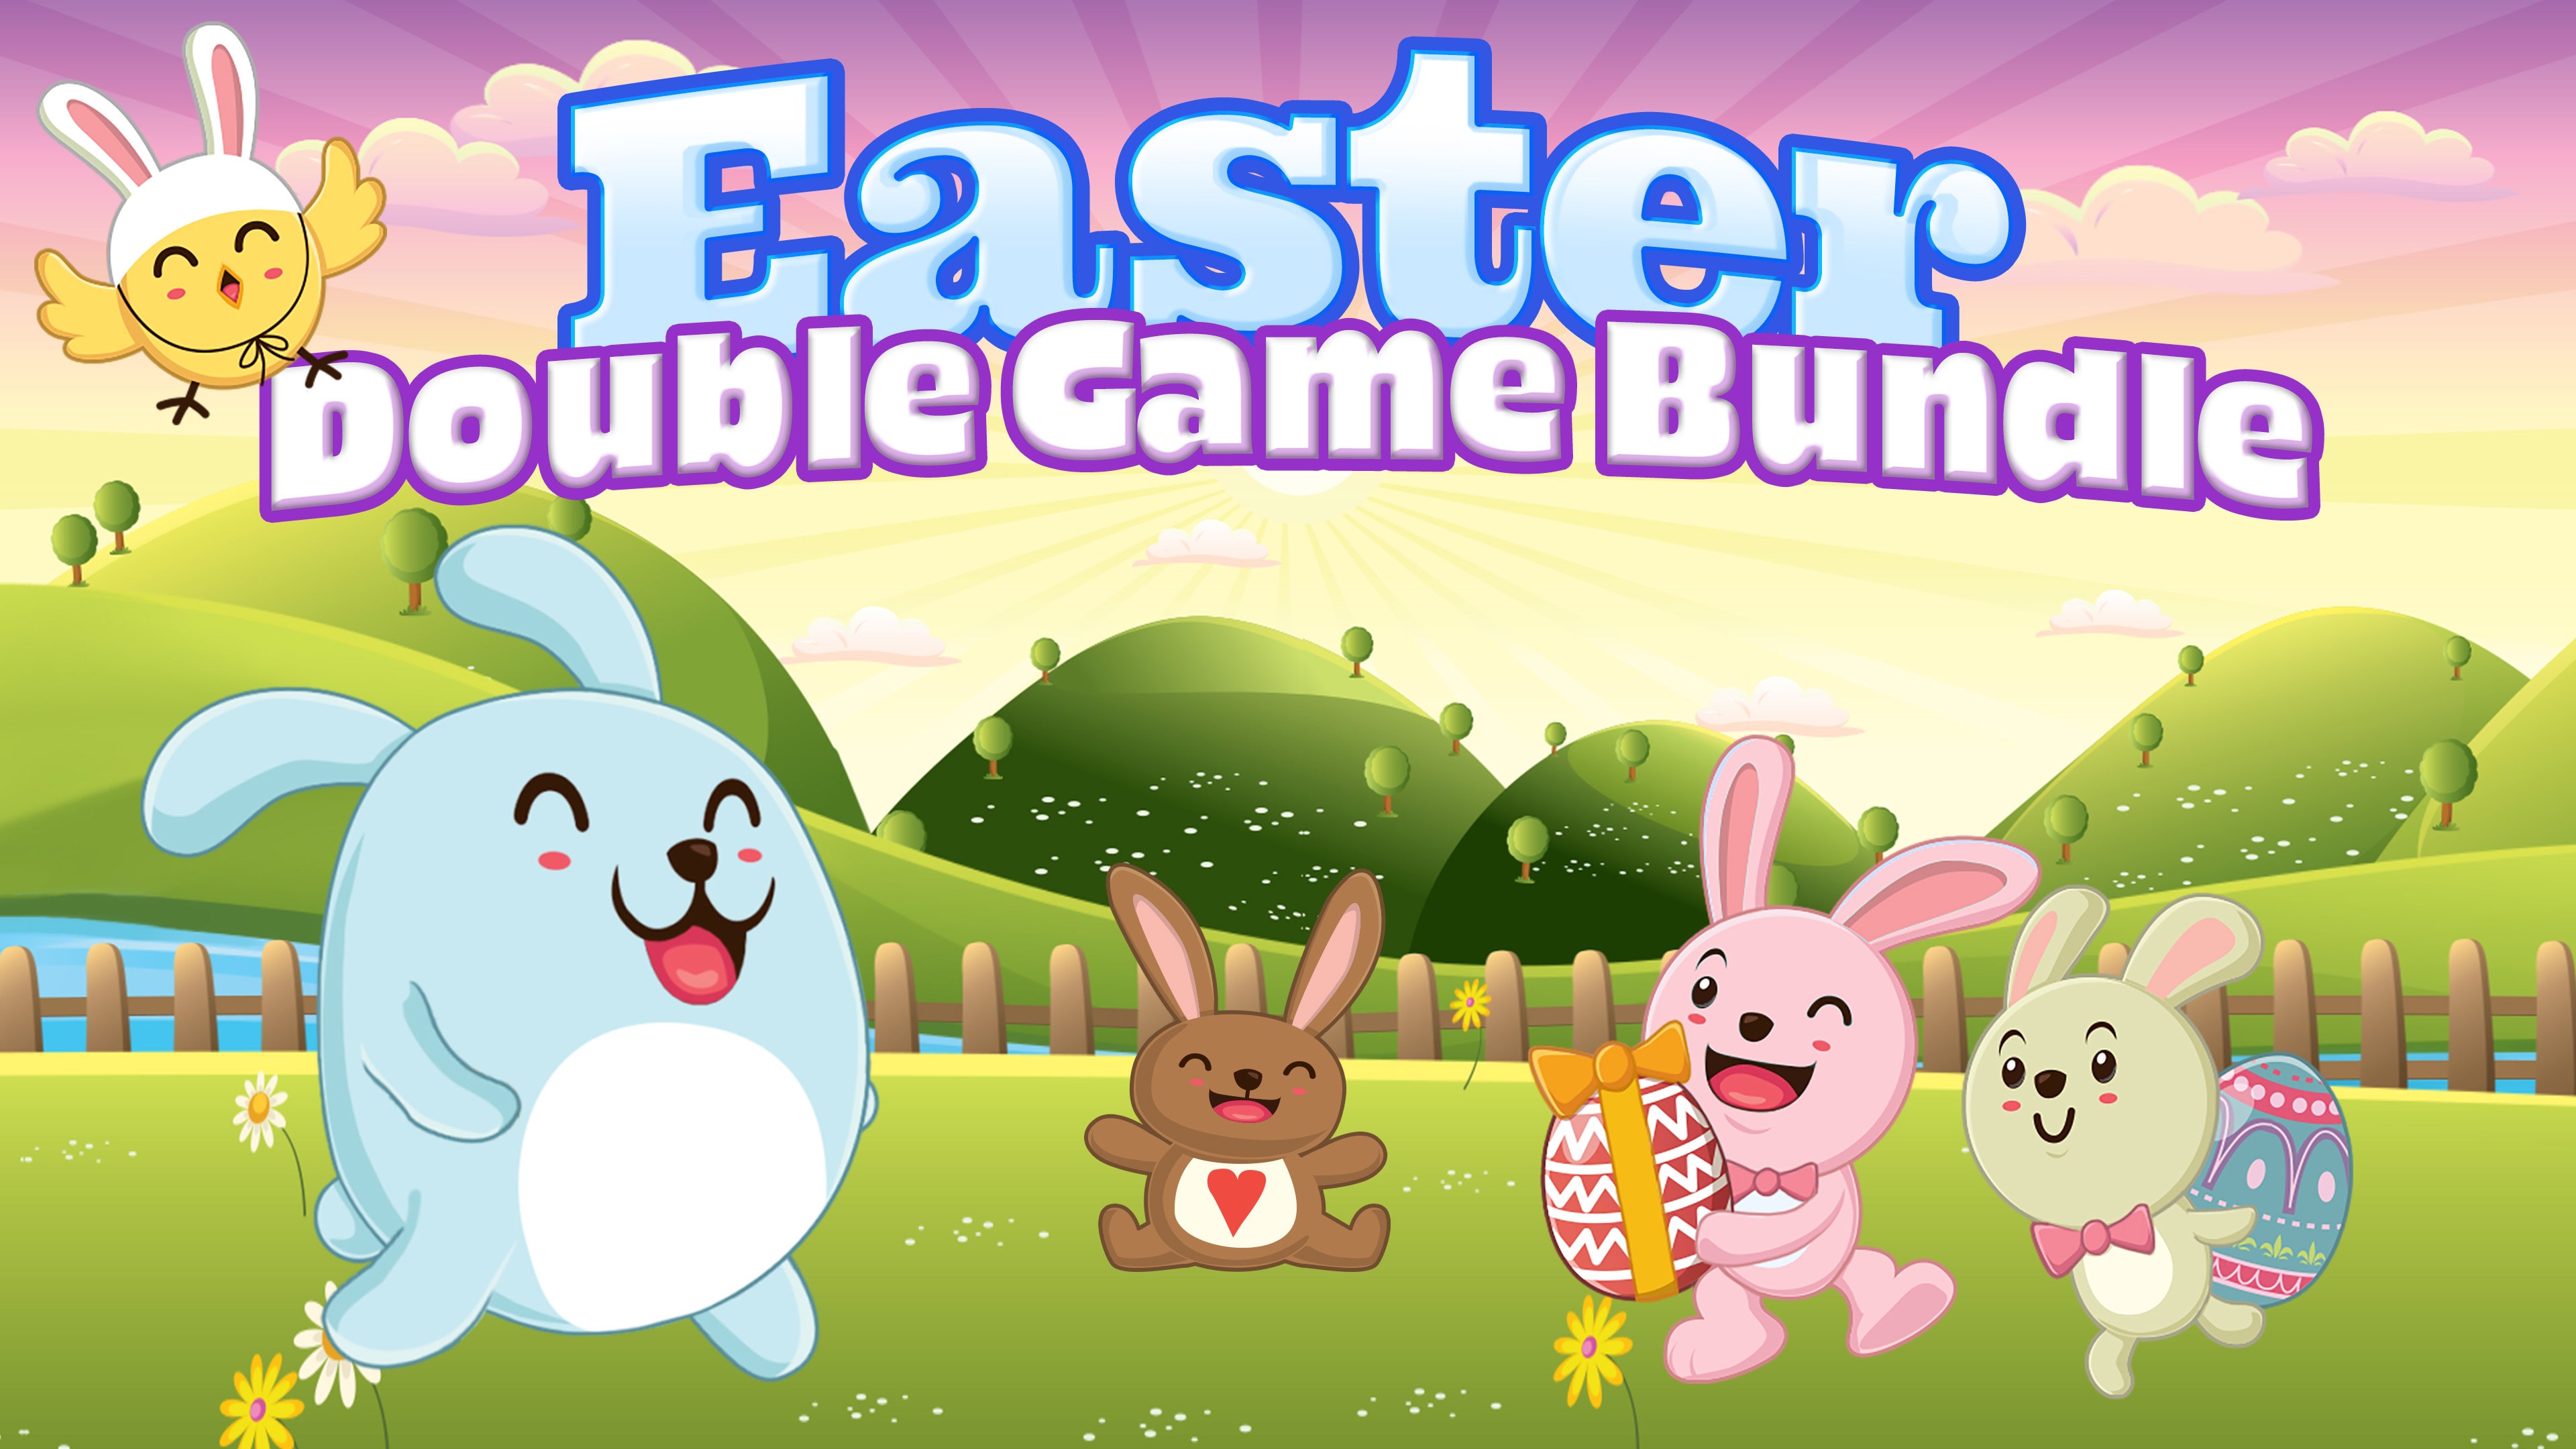 Easter Double Game Bundle